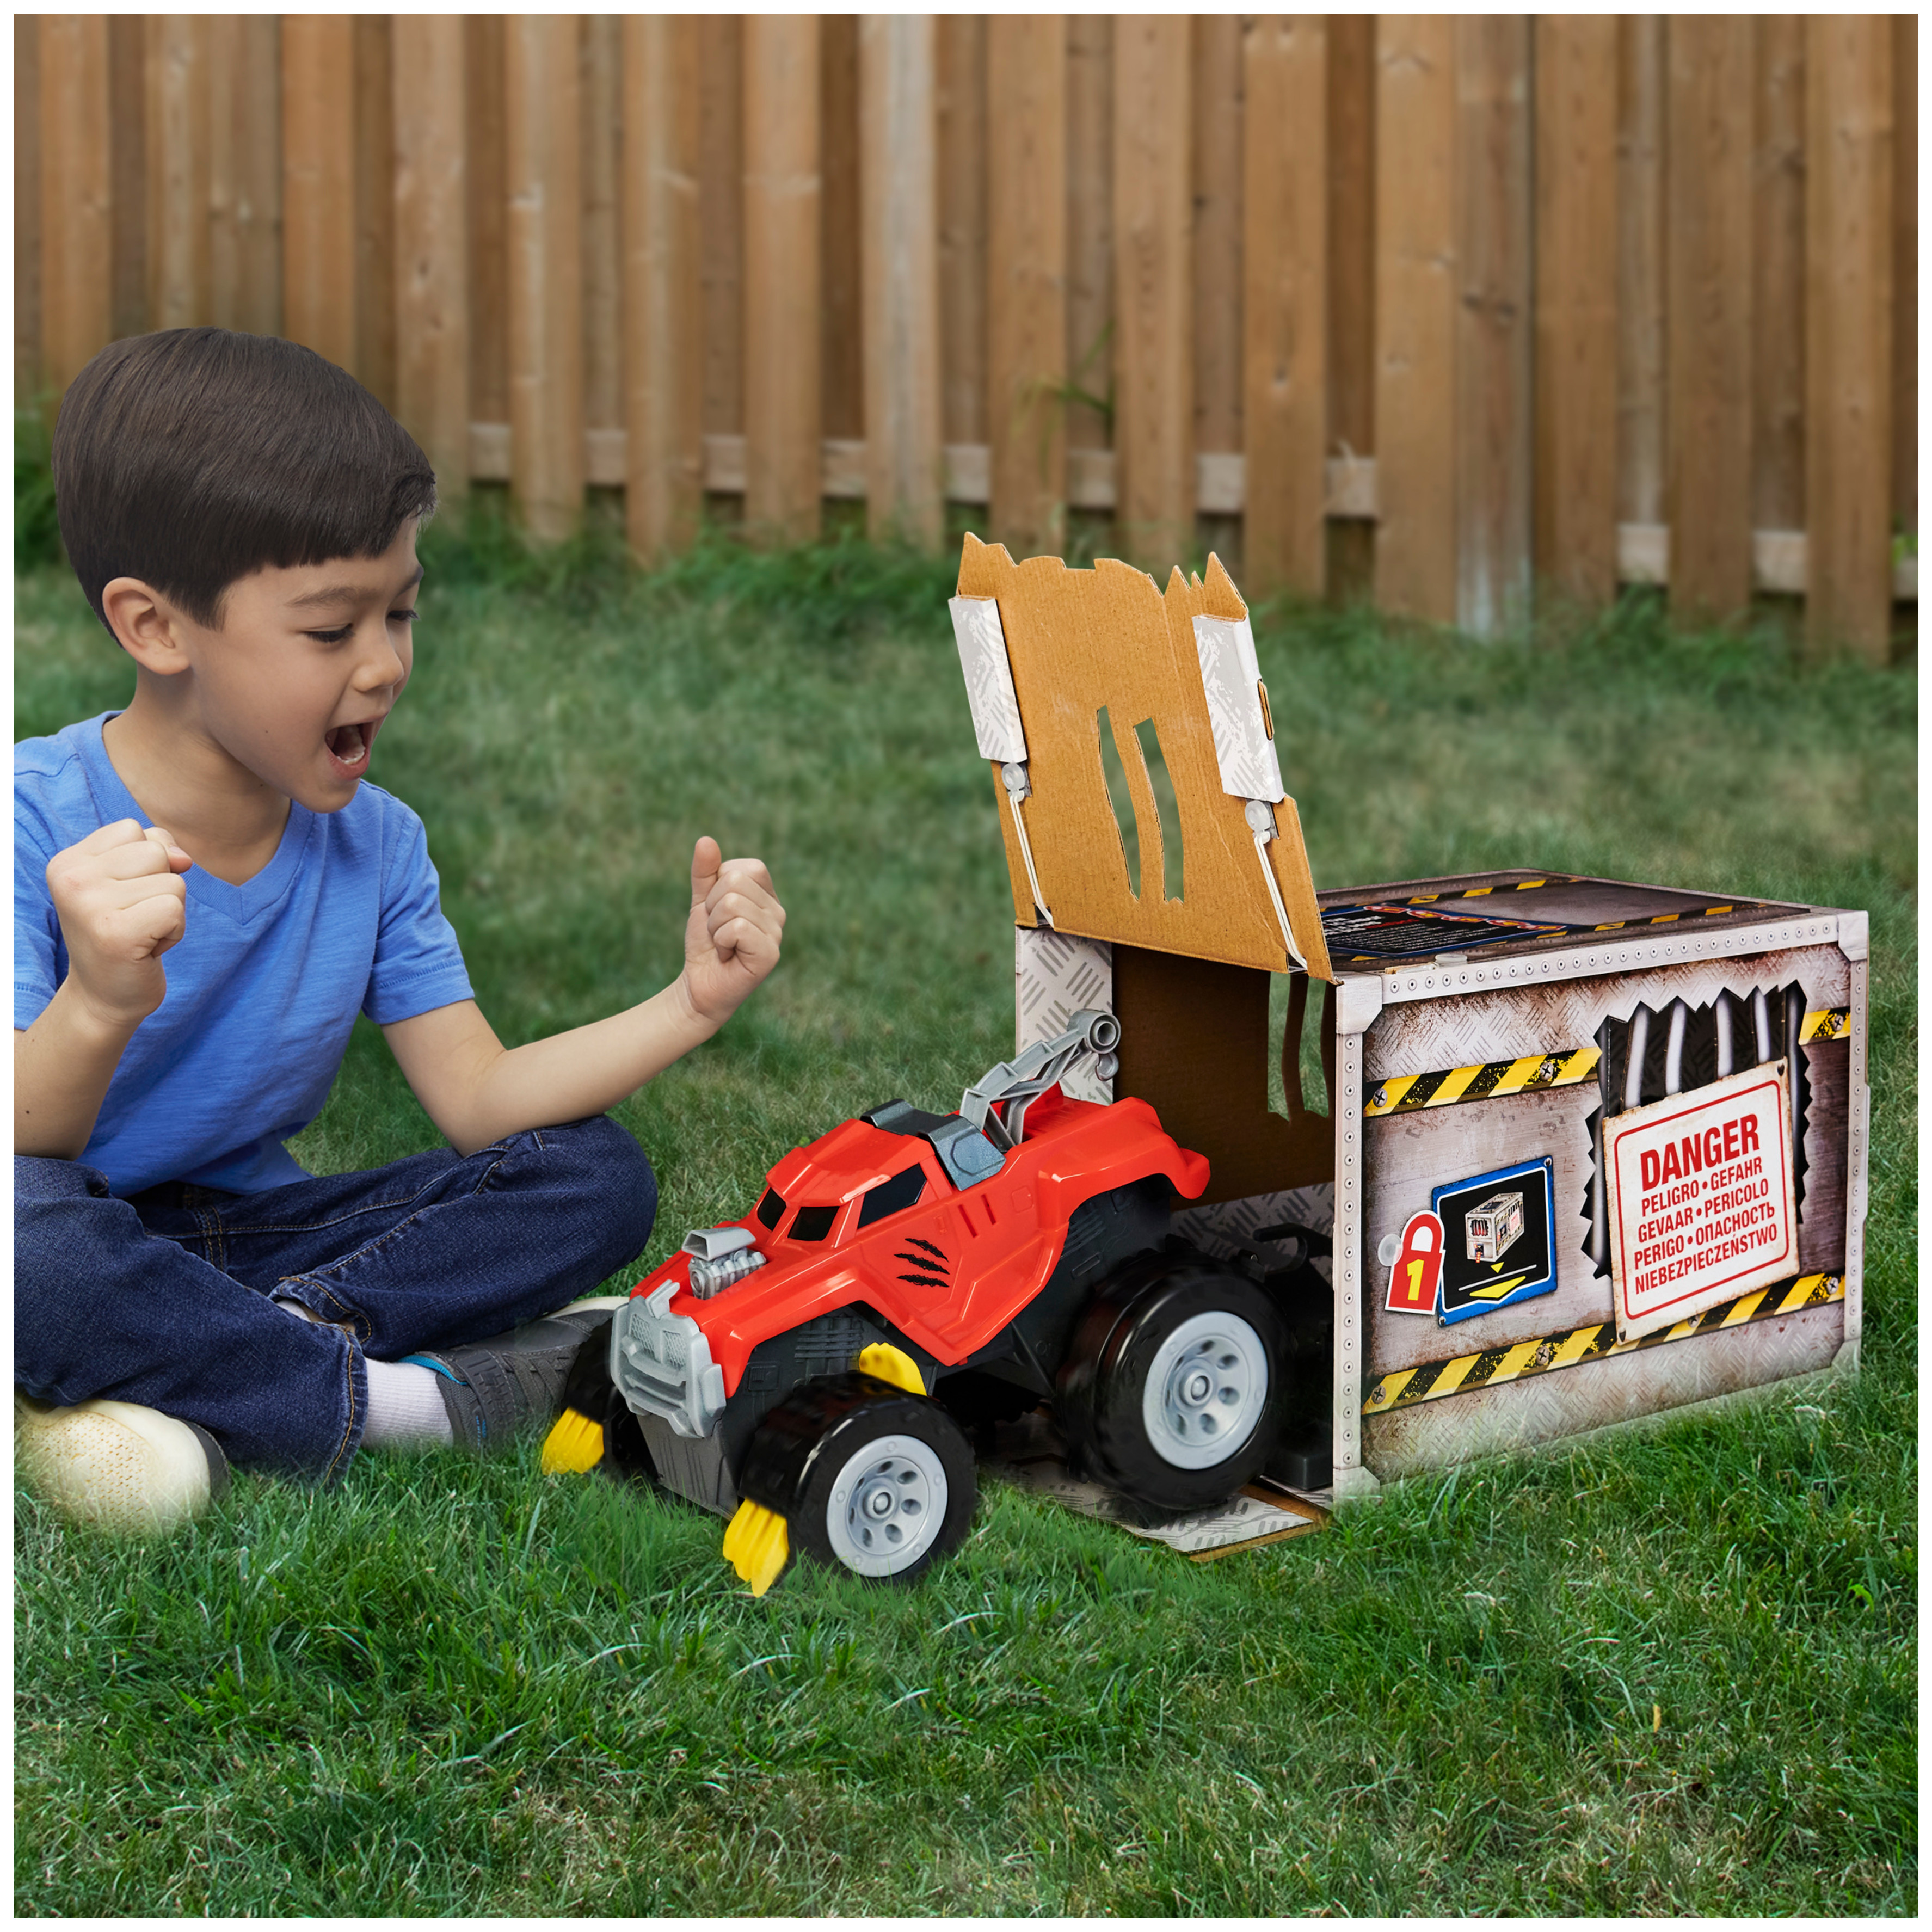 The Animal, Interactive Unboxing Toy Truck with Retractable Claws and Lights and Sounds, for Kids Aged 4 and up - image 10 of 11